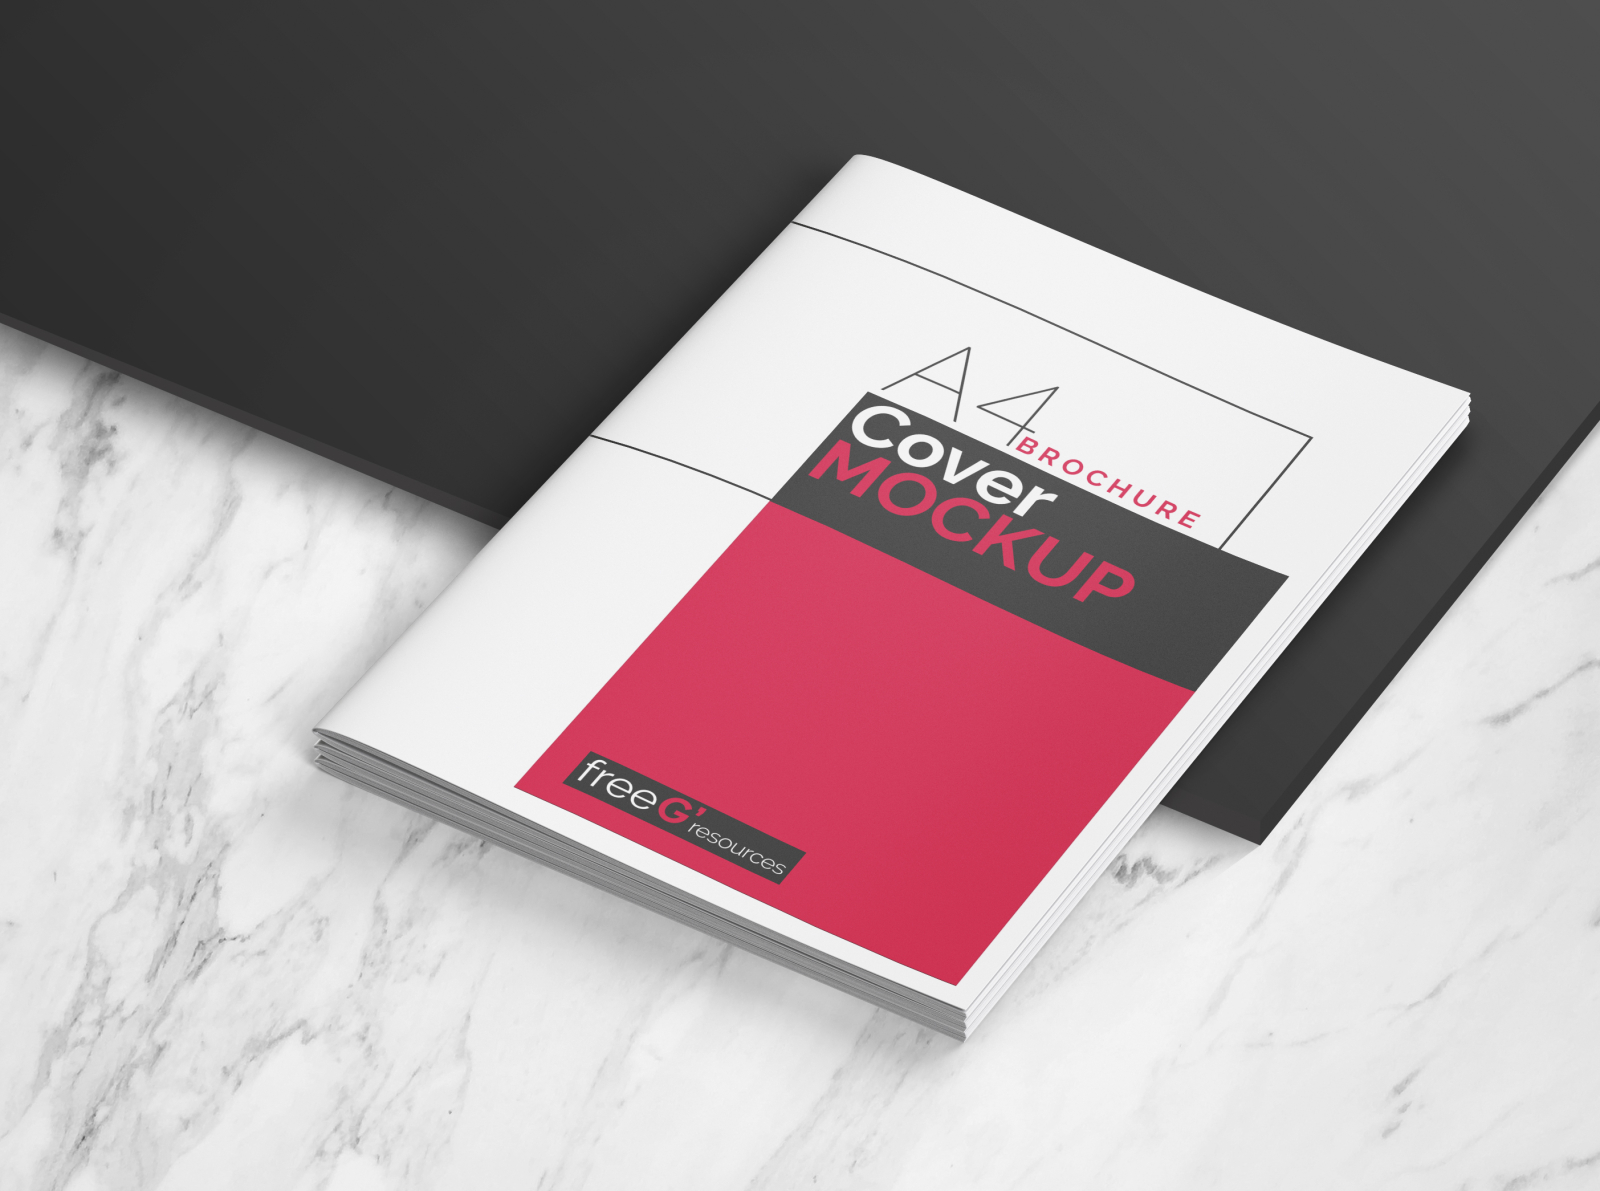 A4 Brochure Mockup free Download by freeG'resources on Dribbble